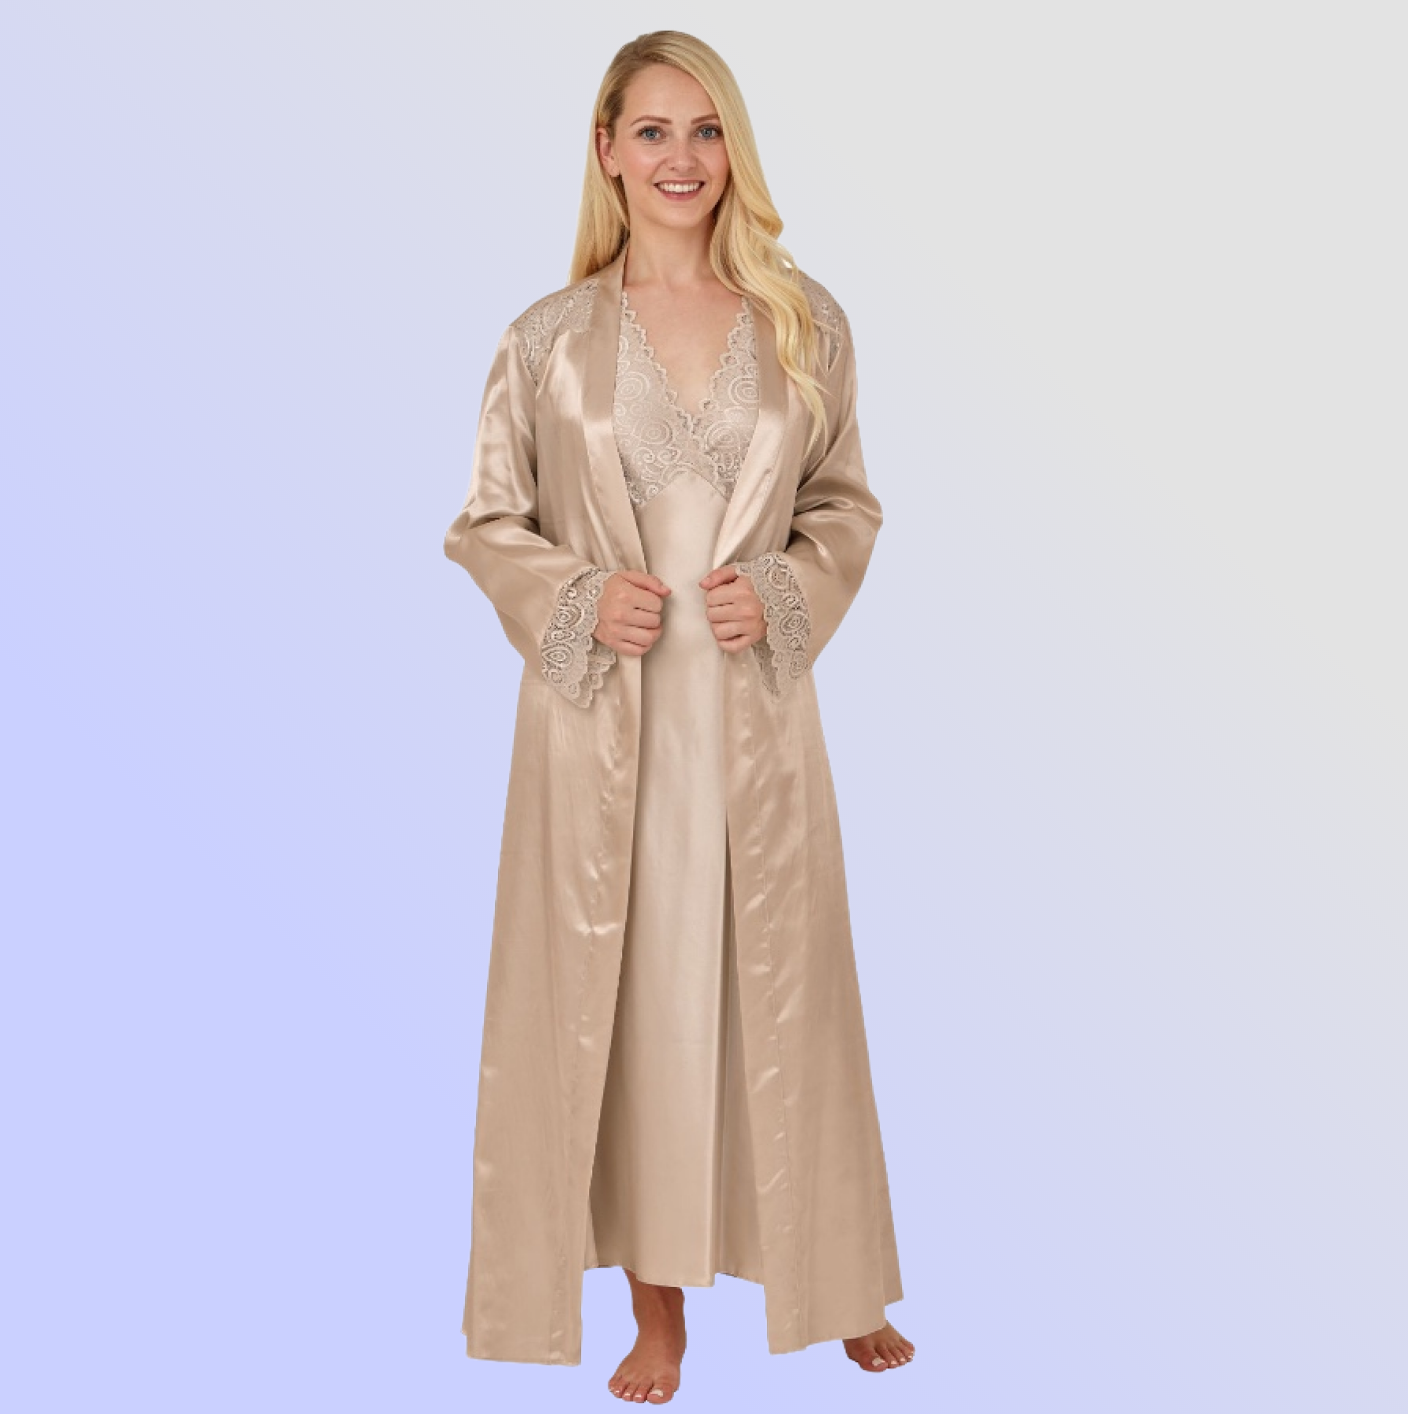 Satin and Lace Robe - Almond or Slate